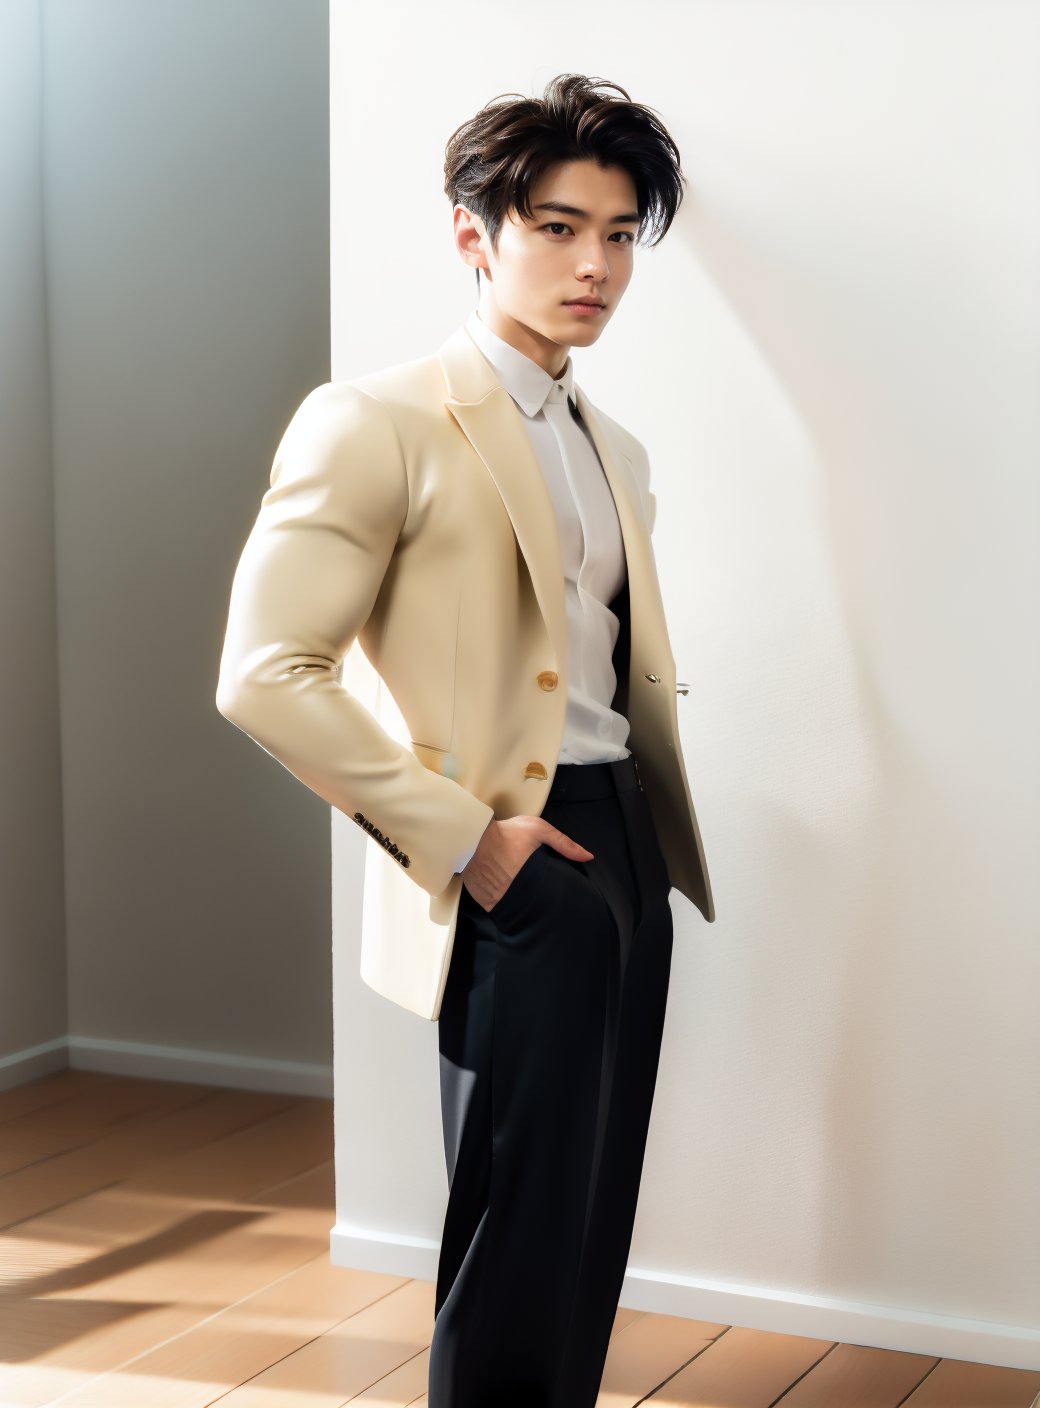 A mesmerizing male ((35 year old)) model with thick black hair and caramel highlights, his features is a mix of Chinese and Korean, ((Cha Eun-woo:0.5),  (Xiao Zhan:0.5)), prominent dimples on his cheeks, full intense pouty lips, light grey blue eyes, sharp nose, high cheekbones, defined jawline, smiling playfully towards the camera, in white dress shirt and black dress pants, business suit ((full body profile)), ethereal dreamy foggy, photoshoot by Annie Leibovitz, editorial Fashion Magazine photoshoot, fashion poses, office space with leather couches, mahogany desk, High detail, high quality, 8k, Kinfolk Magazine. Film Grain. a soft smile. Kodak gold 400,Extremely Realistic,realhands, ((copy Xiao Zhan model poses)), Masterpiece, Cha Eun Woo, athletic_male, toned_male